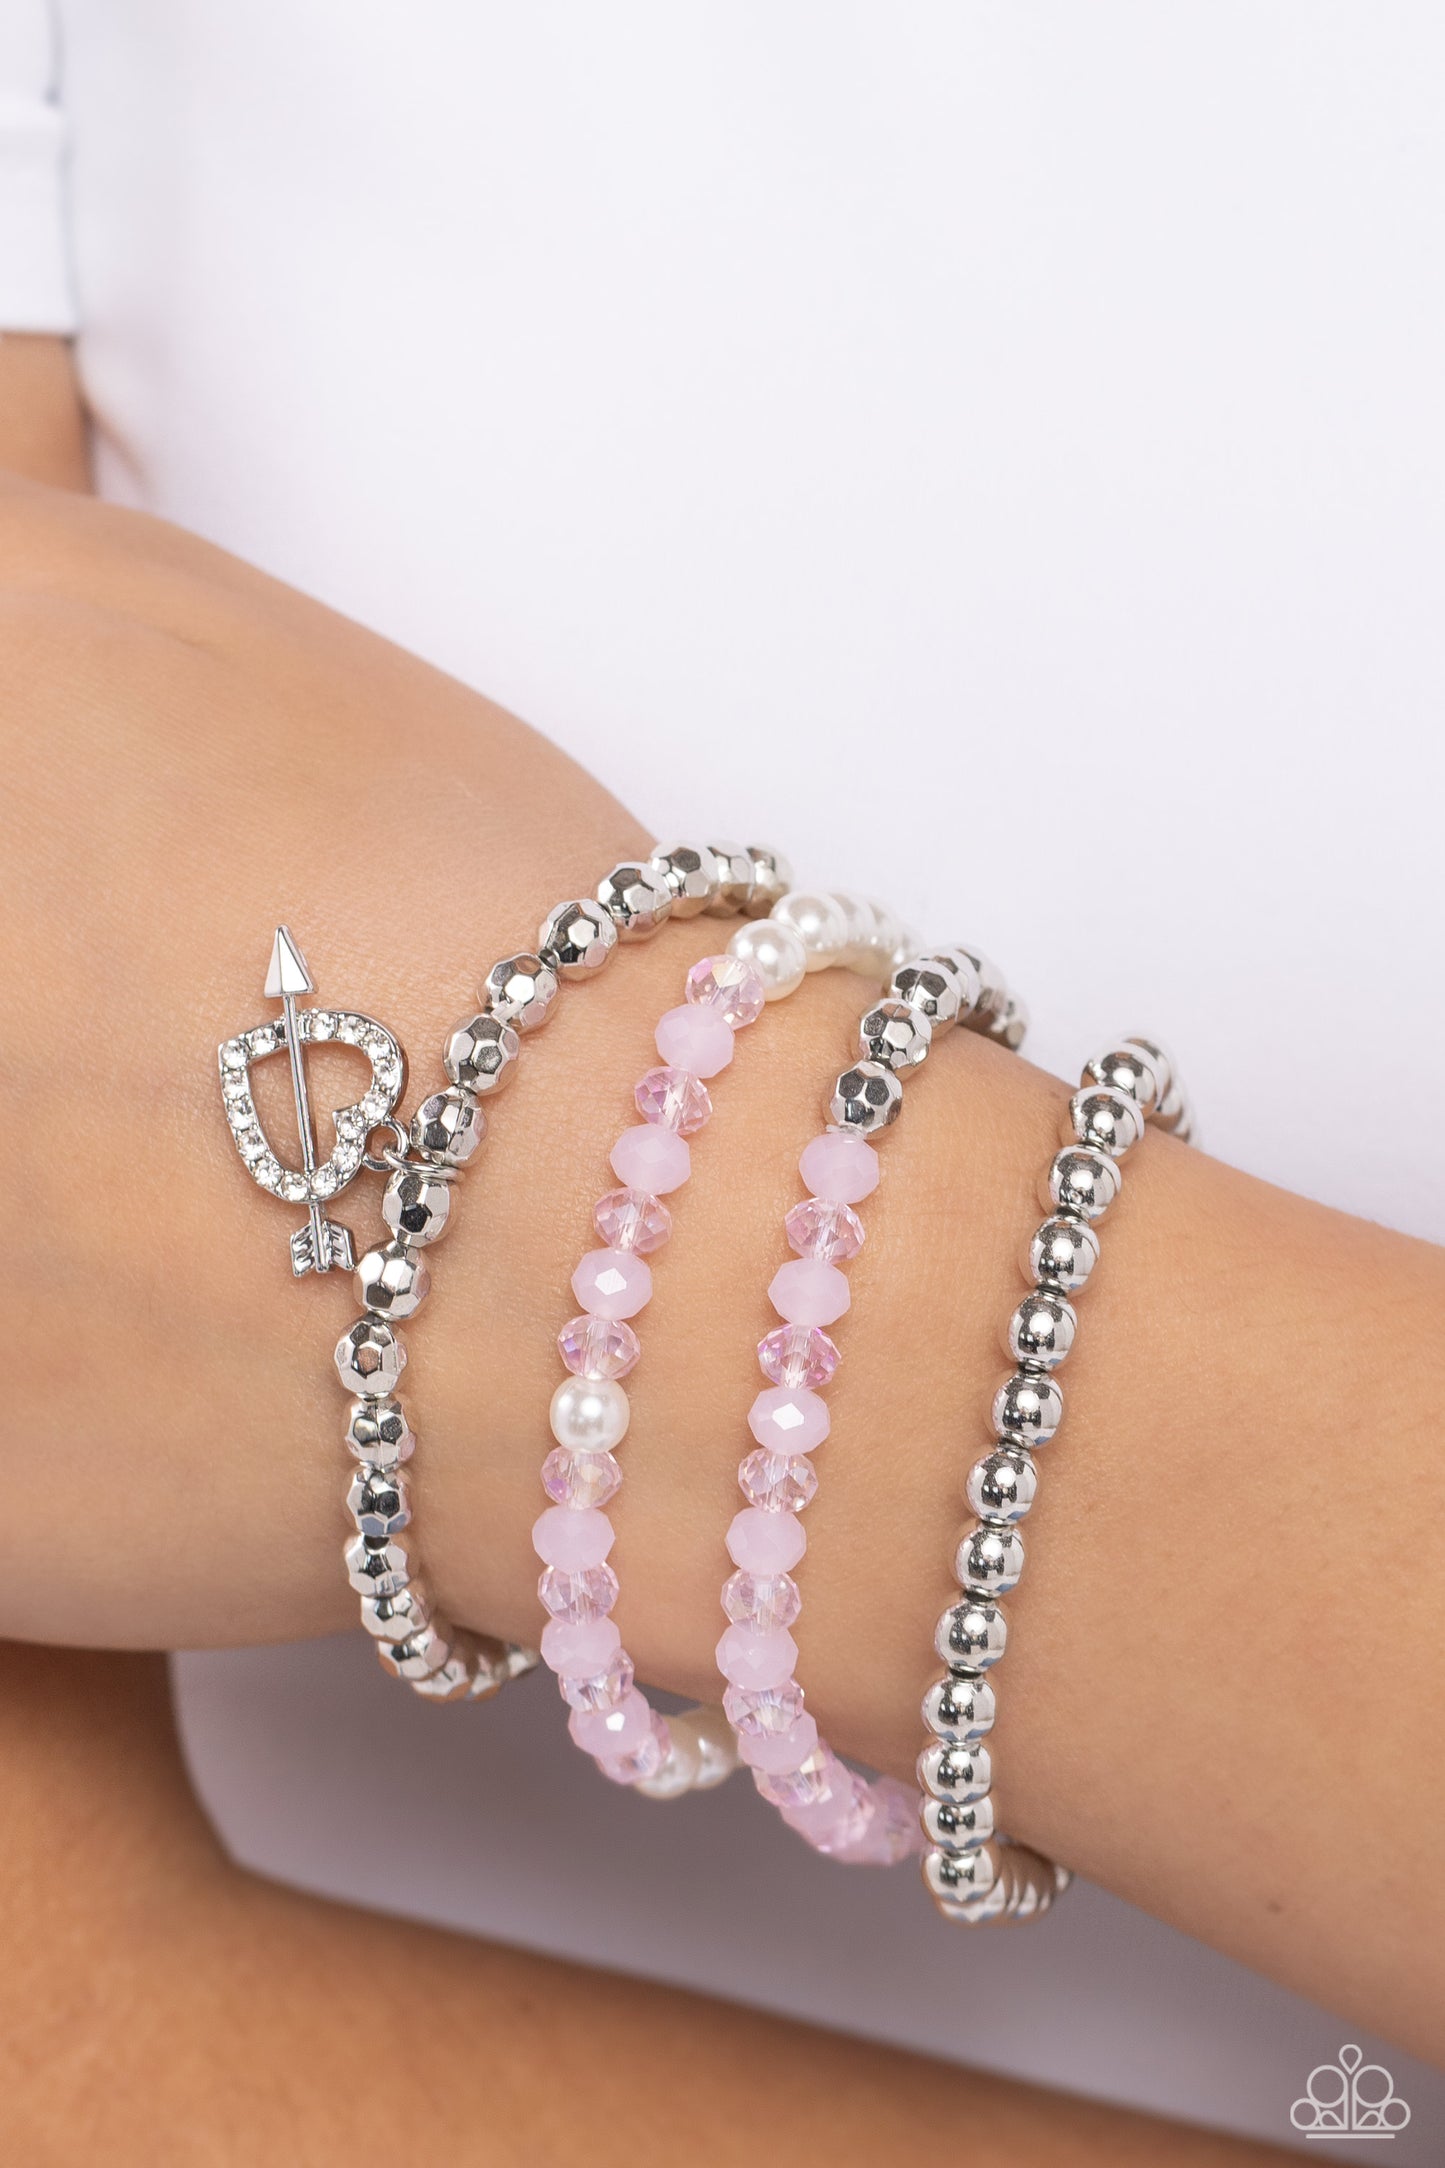 Heart-struck Haute Pink Stretch Bracelet - Paparazzi Accessories  A mismatched collection of faceted silver beads, sleek silver beads, bubbly white pearls, crystal-like pink beads, and opaque pink beads are threaded along stretchy bands around the wrist, creating vivacious layers. An airy rhinestone-encrusted heart charm with a silver arrow dangles from one of the strands for additional romantic flair.  Sold as one set of four bracelets.  SKU: P9RE-PKXX-319XX